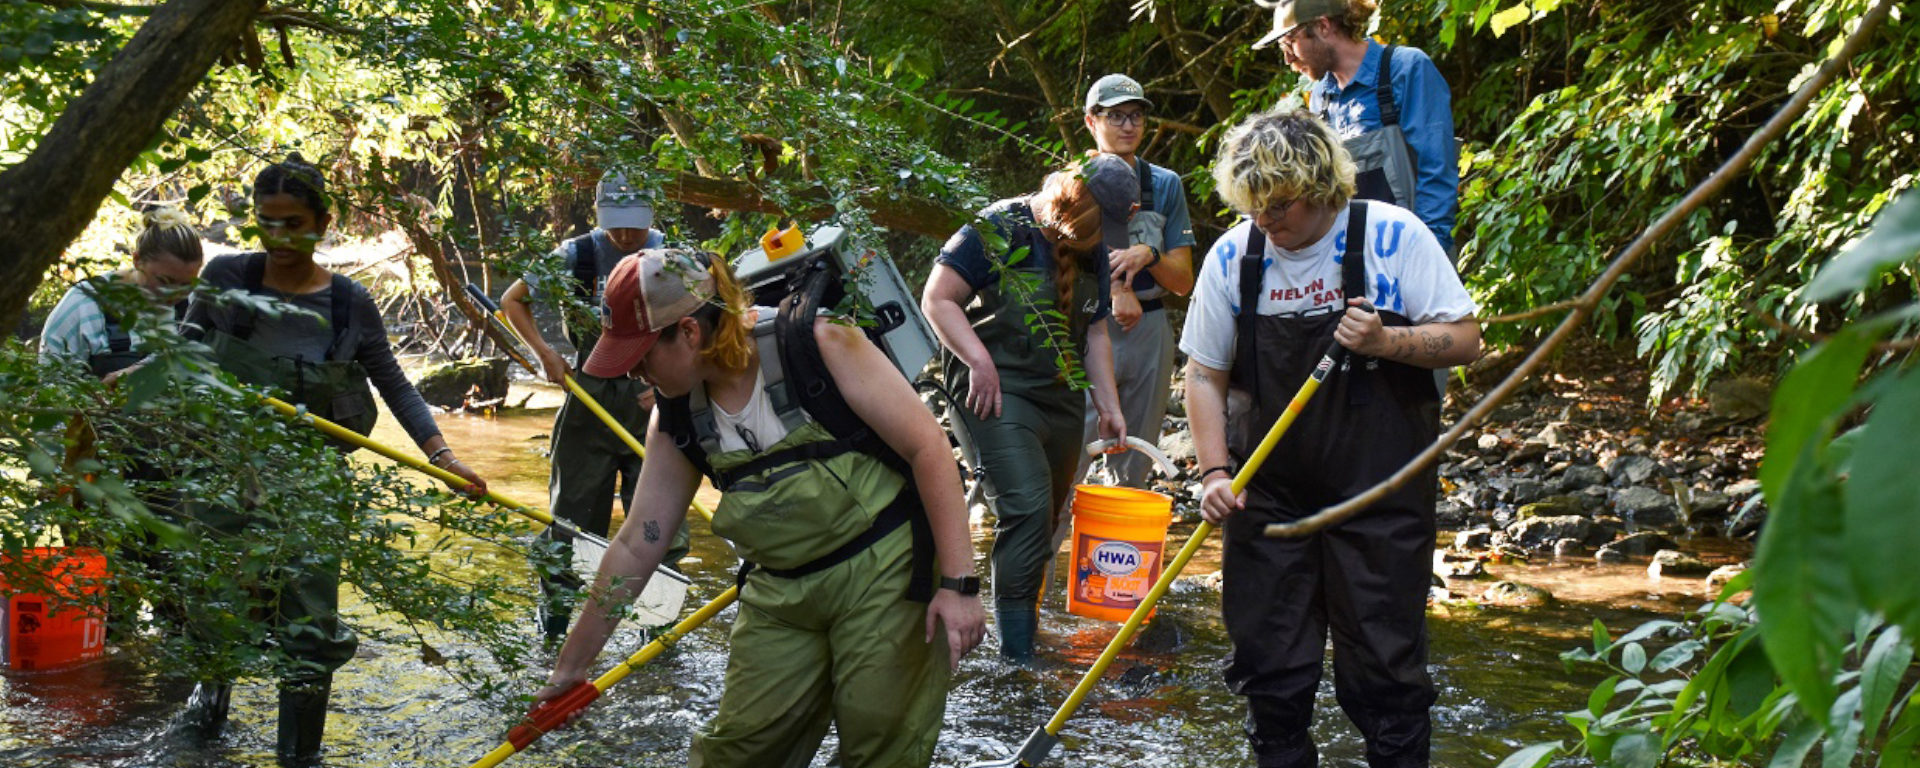 Students in the newly established UTIA School of Natural Resources search a stream for fish. Photo Courtesy